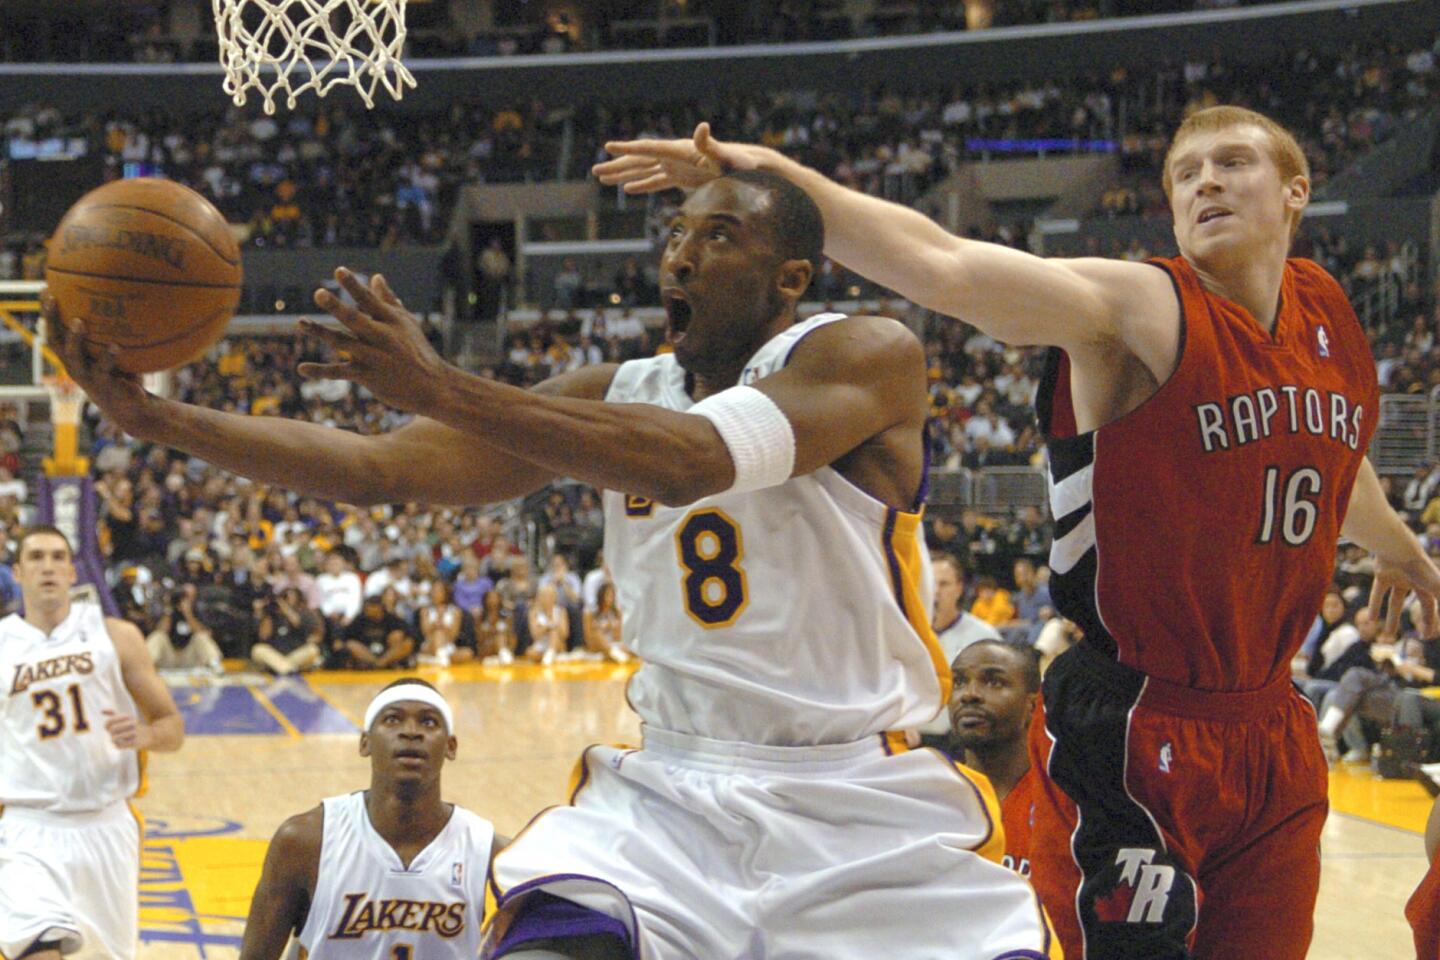 Toronto's Matt Bonner reaches for the ball just before Kobe Bryant scores two of his 81 points against the Raptors on Jan. 22, 2006.